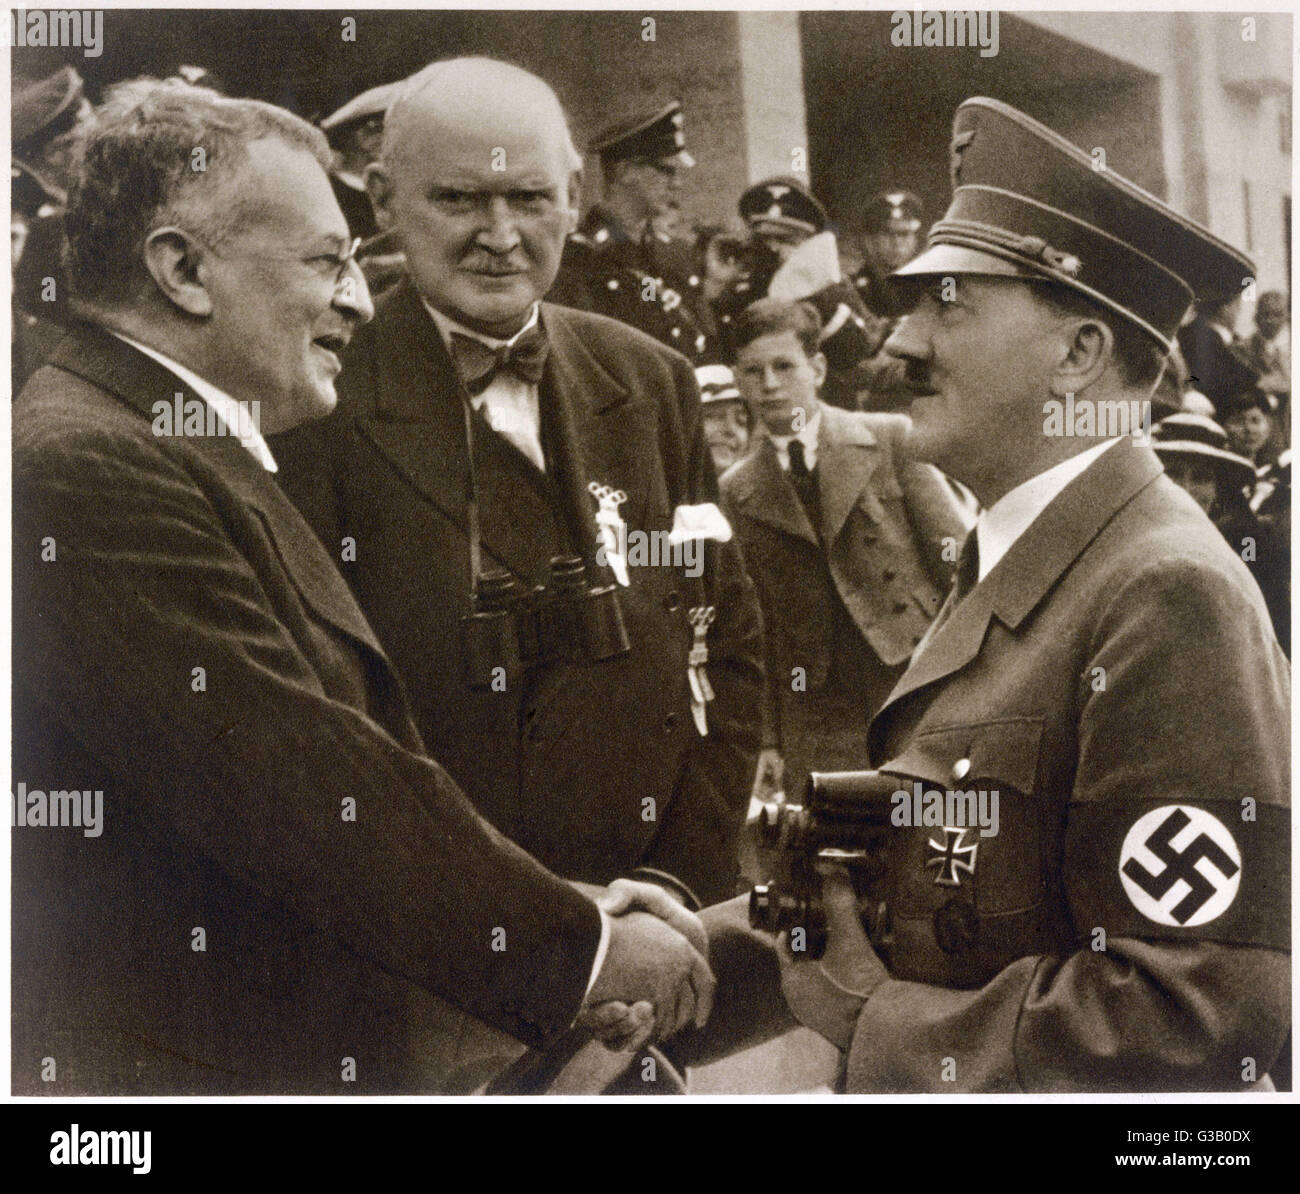 Shaking hands with Sven Anders  HEDIN, Swedish traveller,  at the Berlin Olympic Games        Date: 1936 Stock Photo